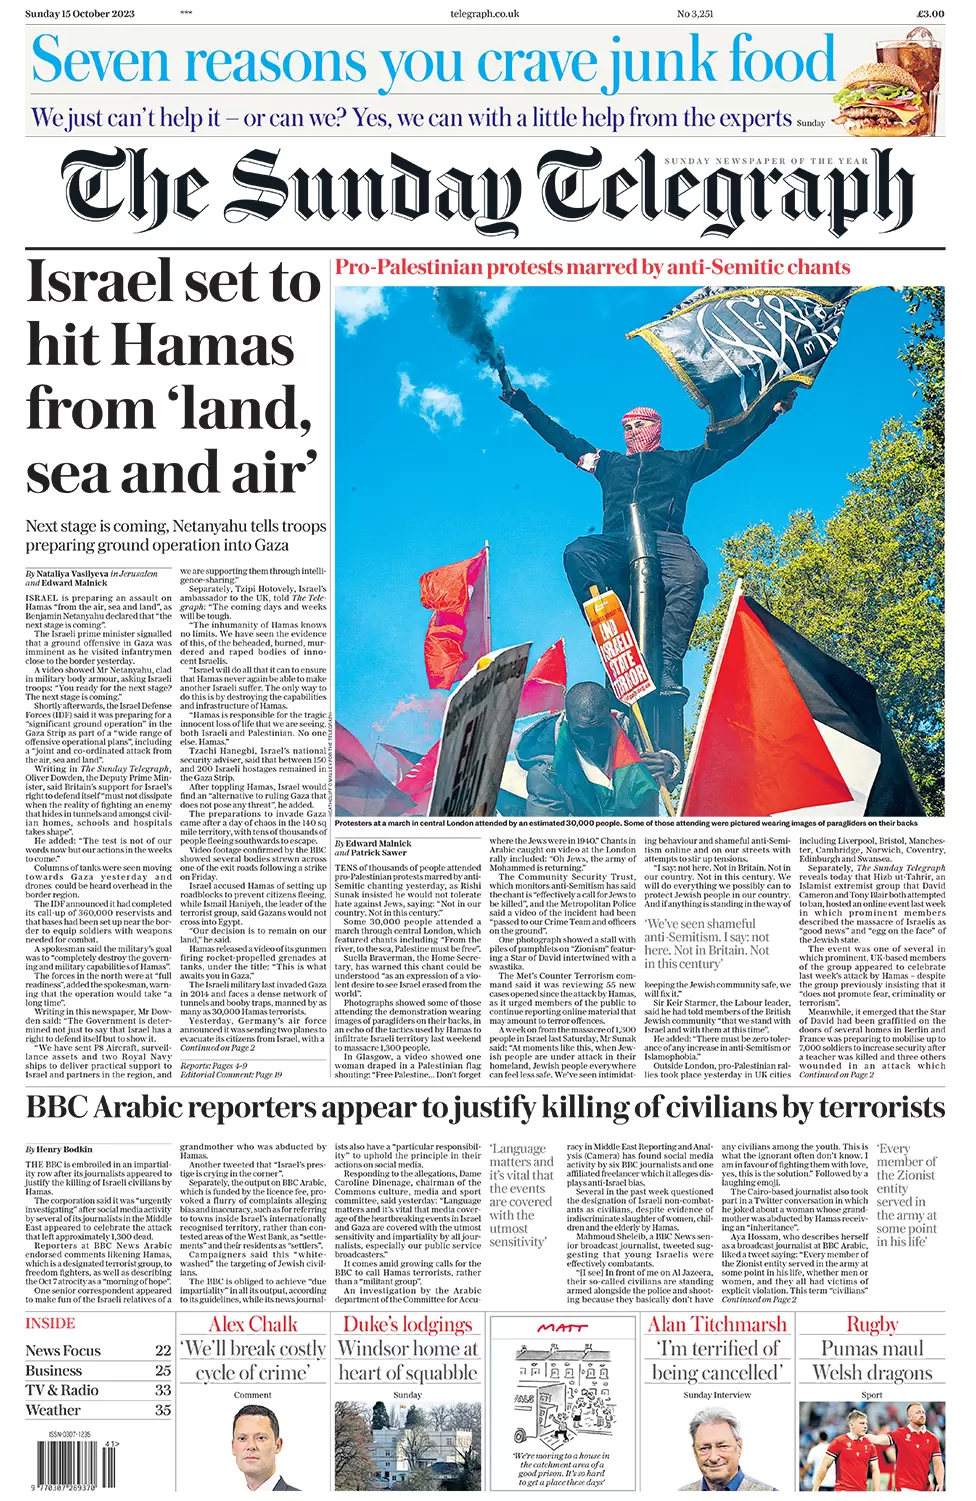 The Sunday Telegraph - Israel set to hit Hamas from ‘land, sea and air’ 